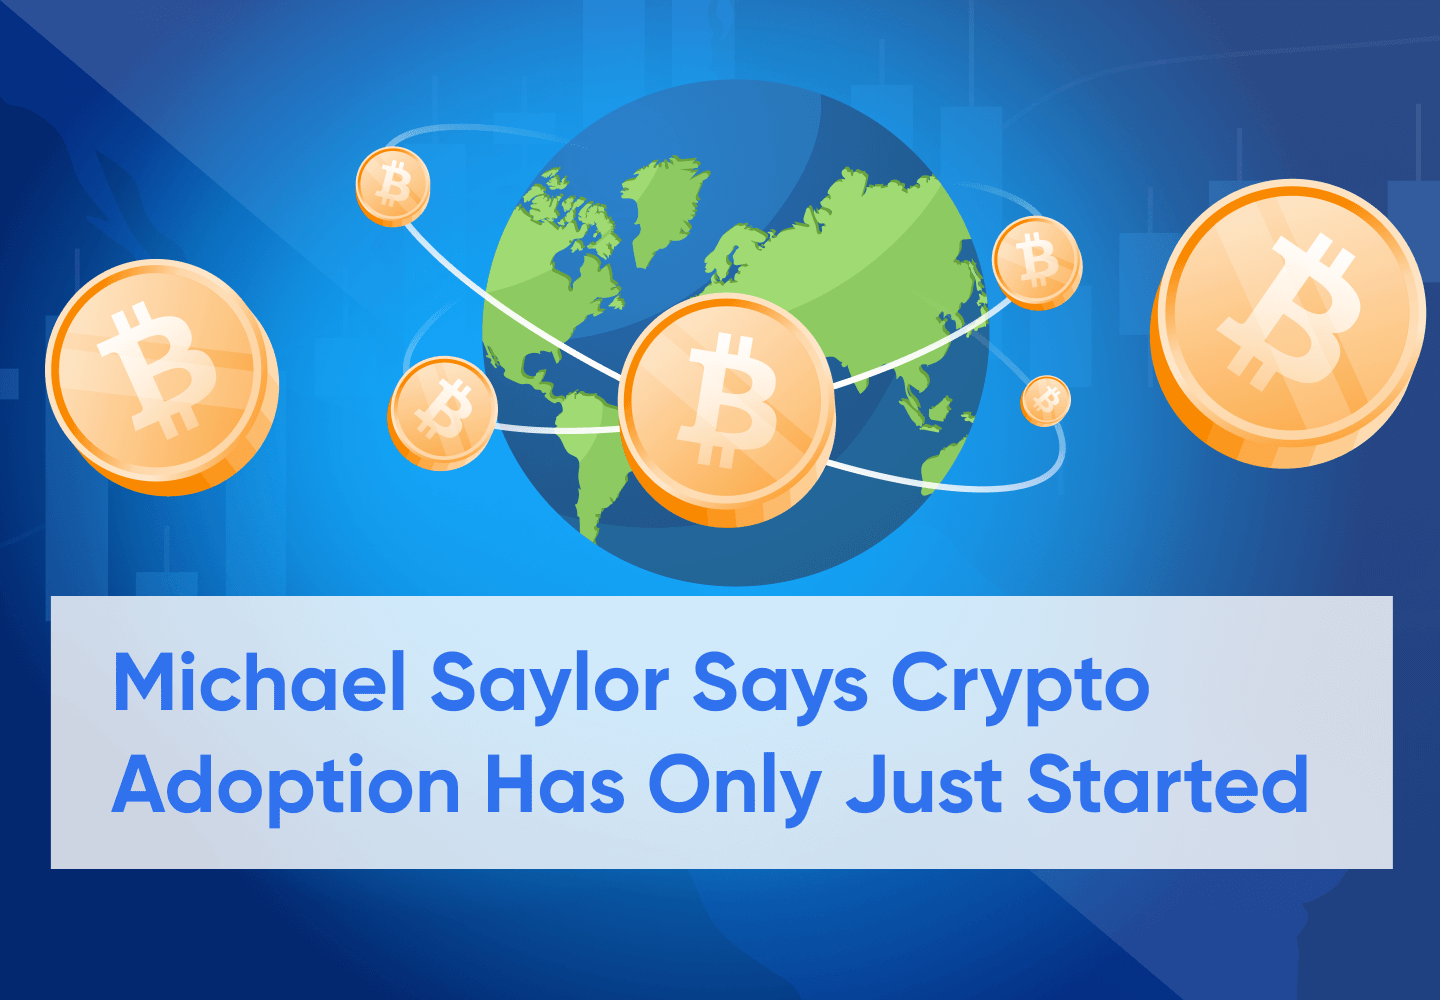 Michael Saylor Proves Crypto Adoption Is Only in Its Early Days